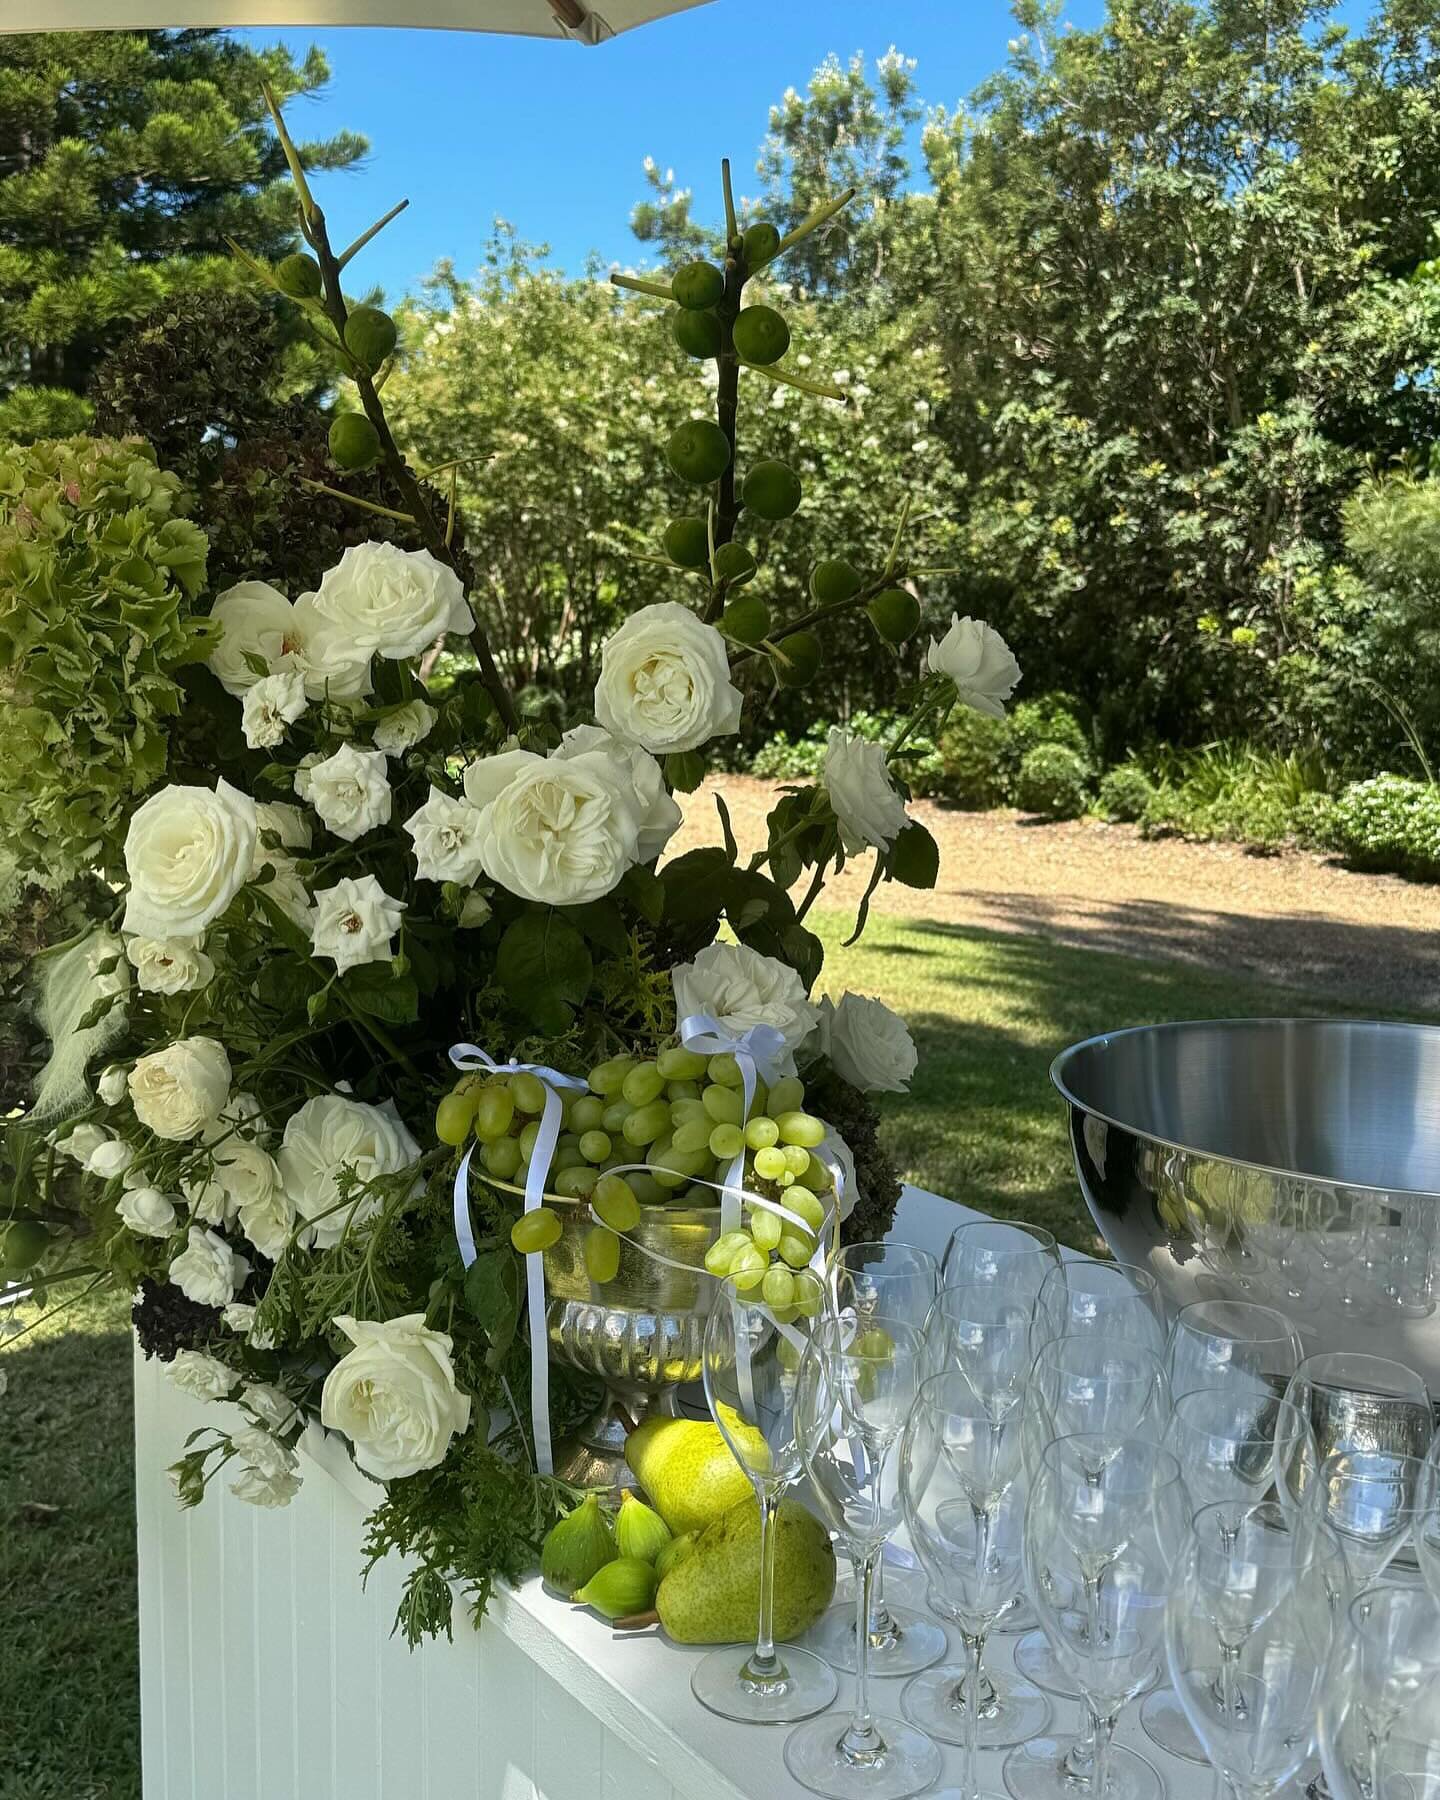 Baby shower blooms for the inspiring @pippaessie creator of @palm.noosa 🌴

Thank you @ginelledale for the snaps! 

#brisbaneeventflorist #brisbaneweddingflorist #noosaweddingflorist #babyshowerflowers #flowerlove #gardenparty #gardenpartywedding #ga